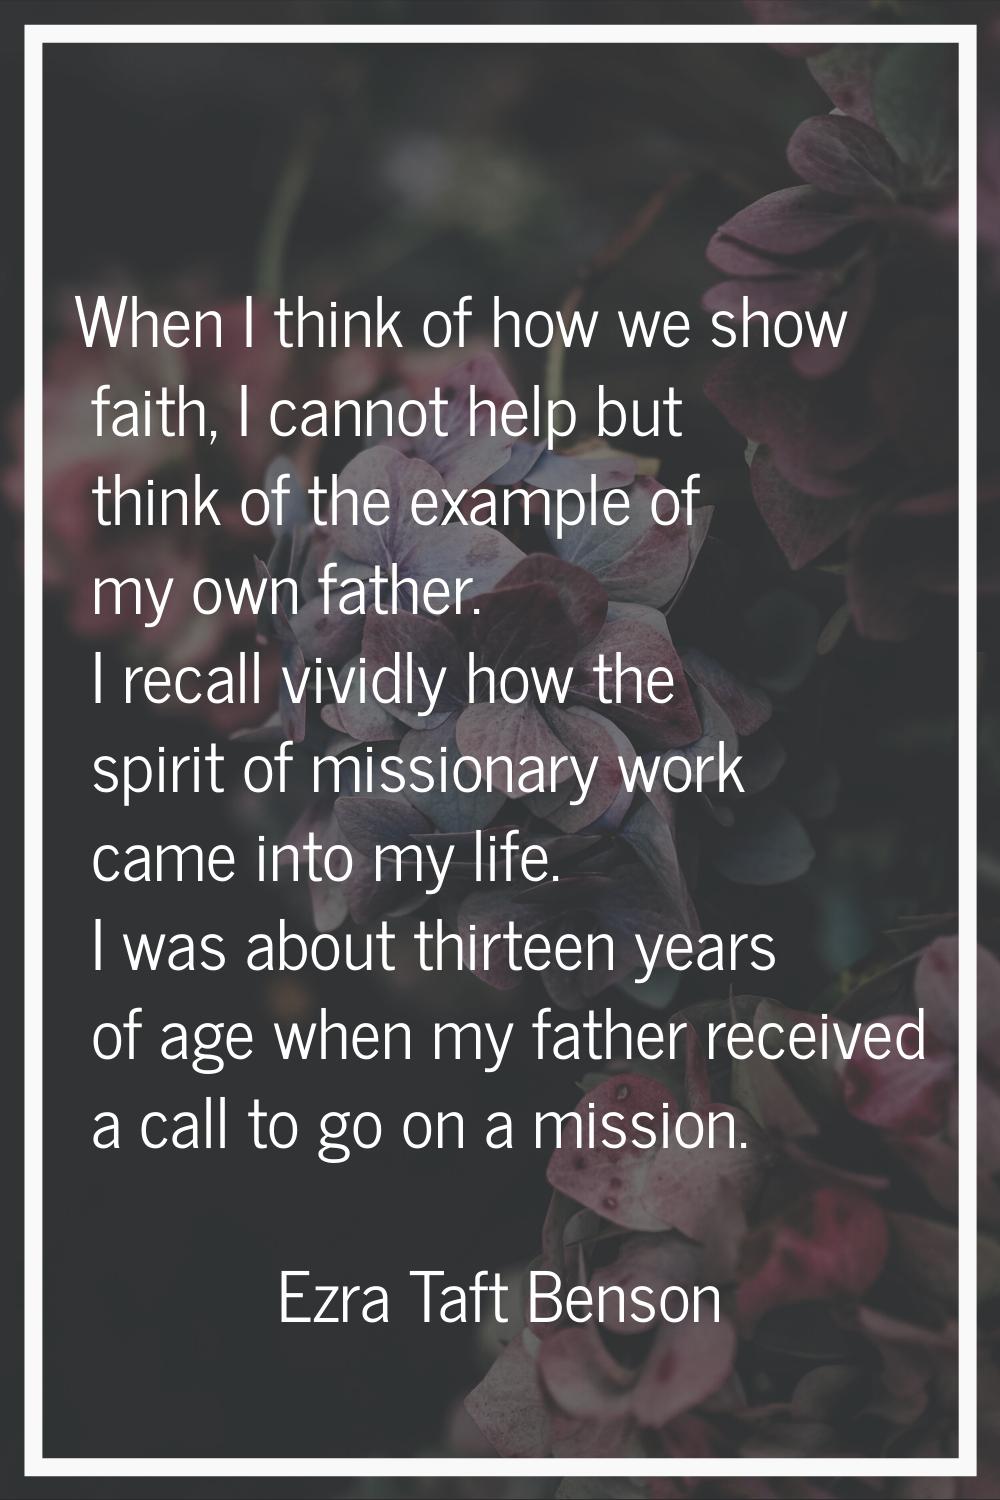 When I think of how we show faith, I cannot help but think of the example of my own father. I recal